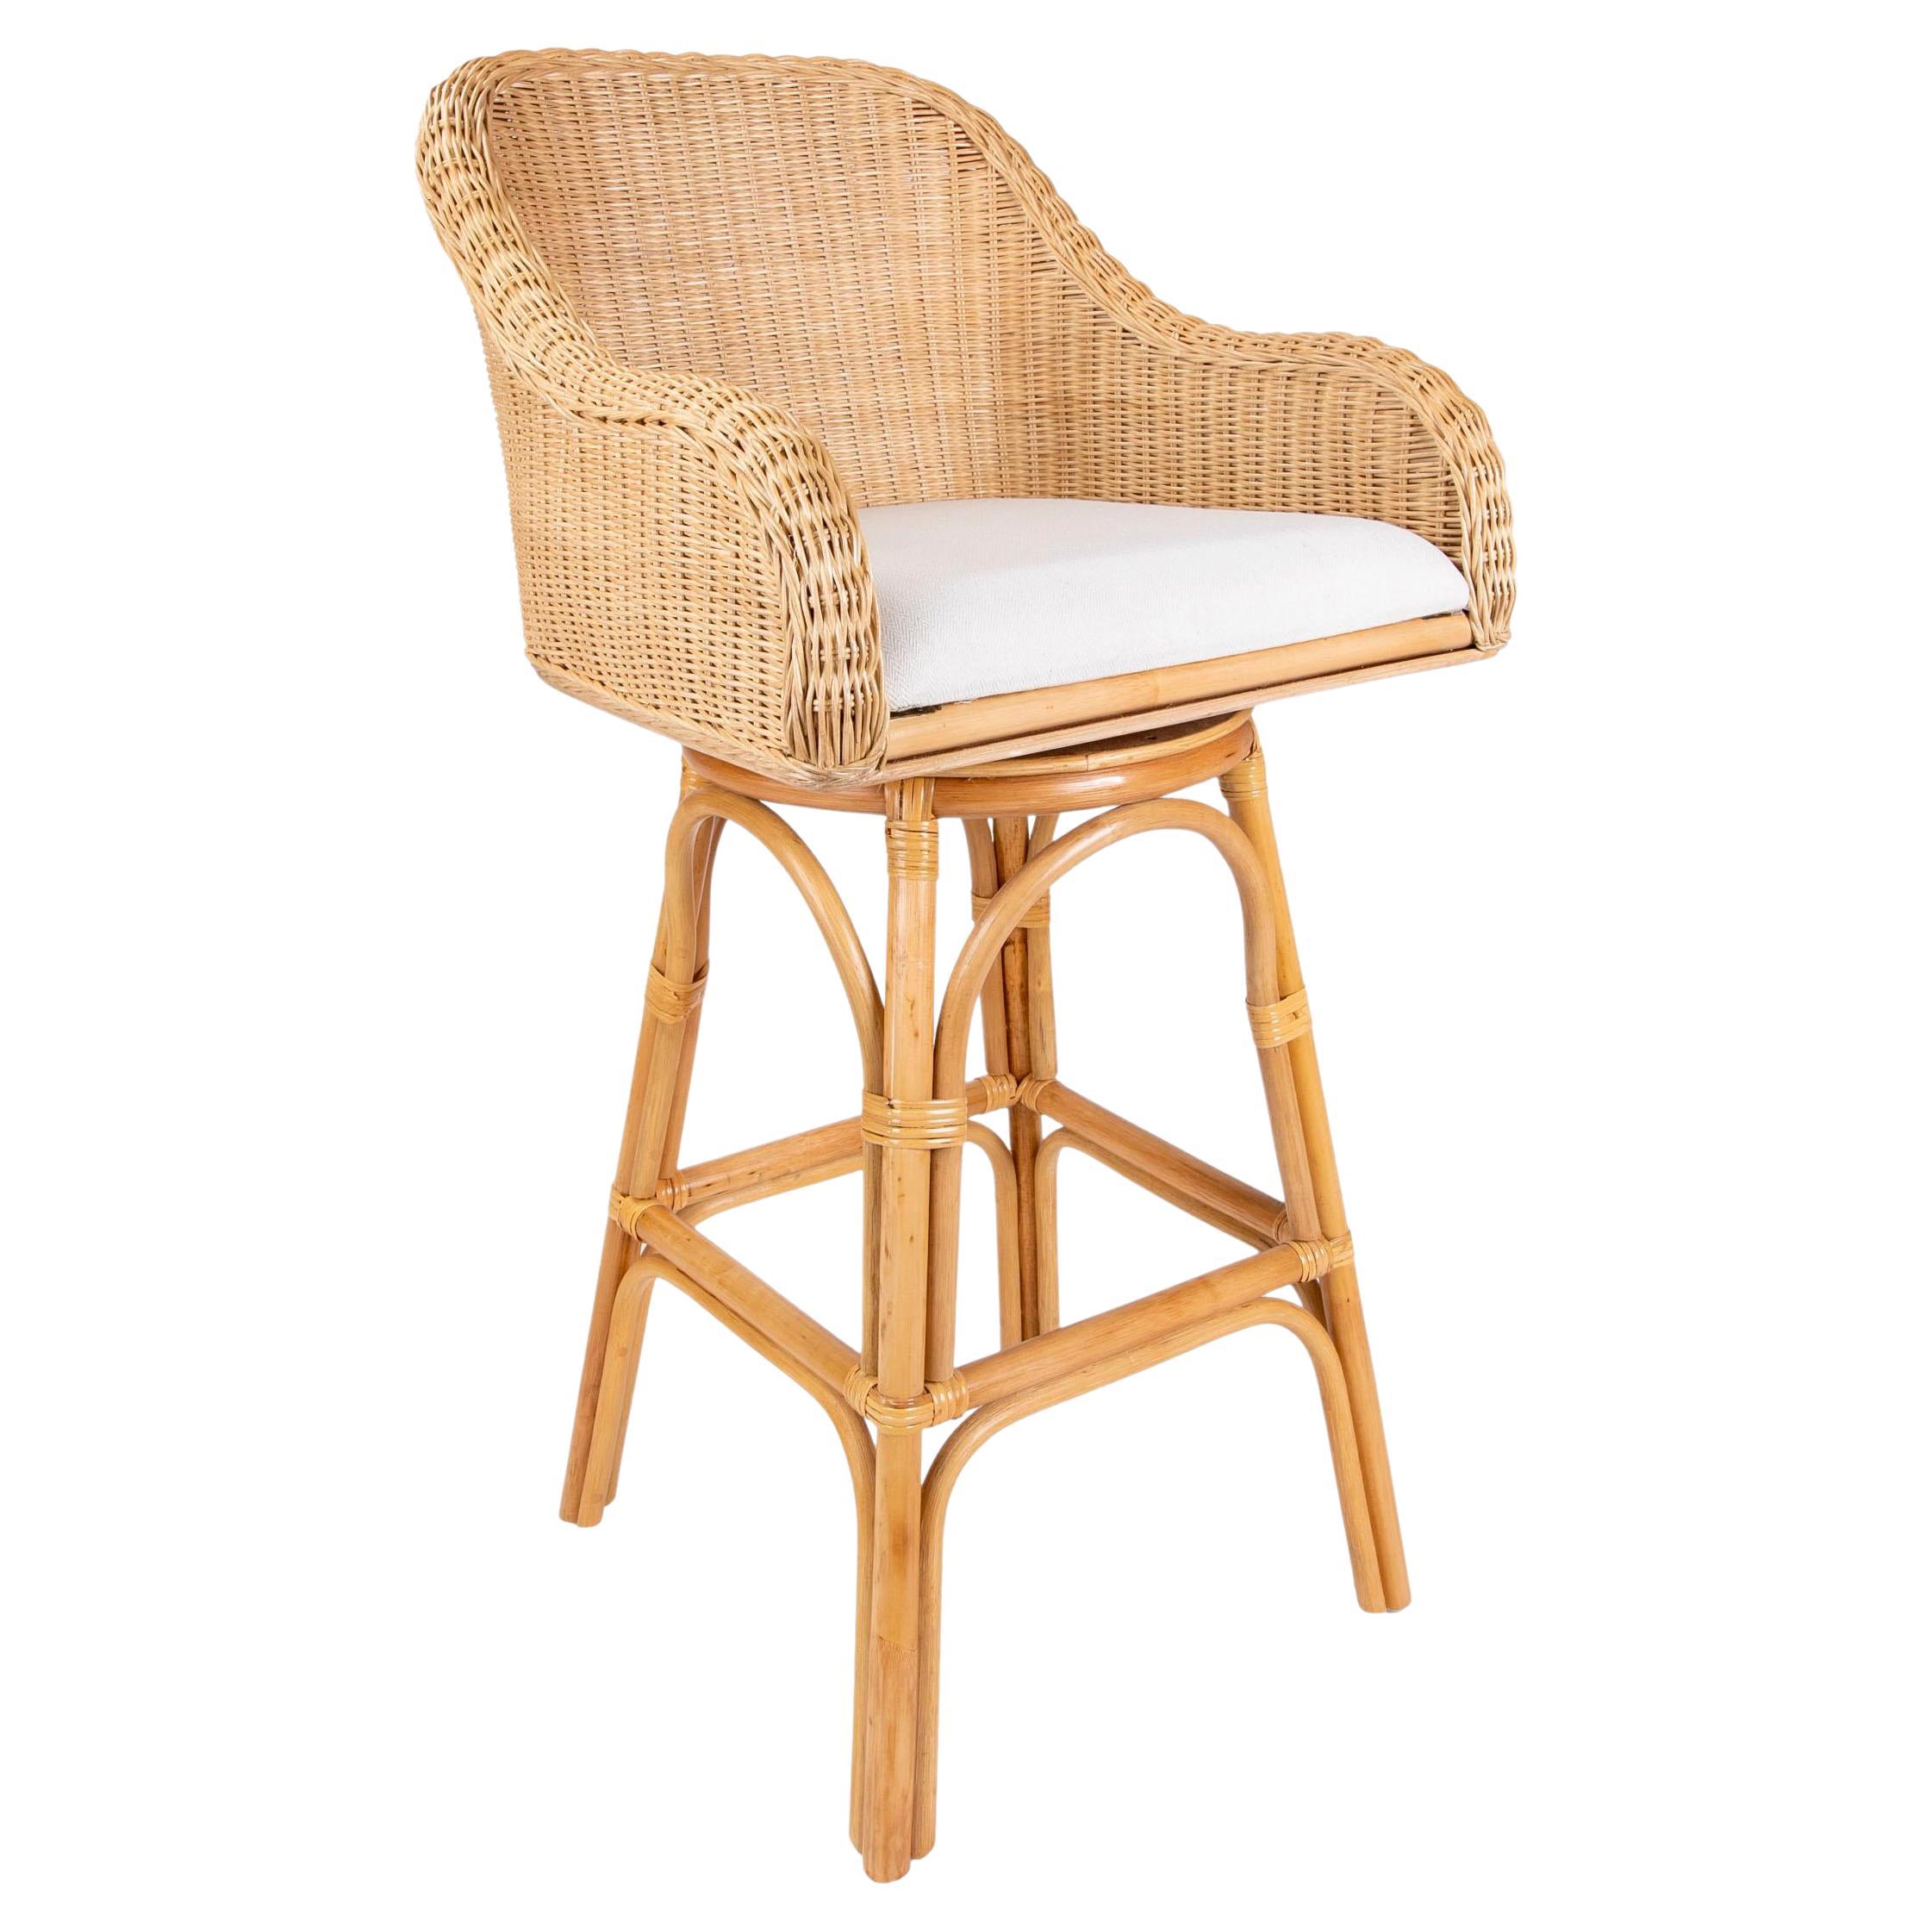 Upholstered Rattan and Wicker Bar stool with Sideways Movement